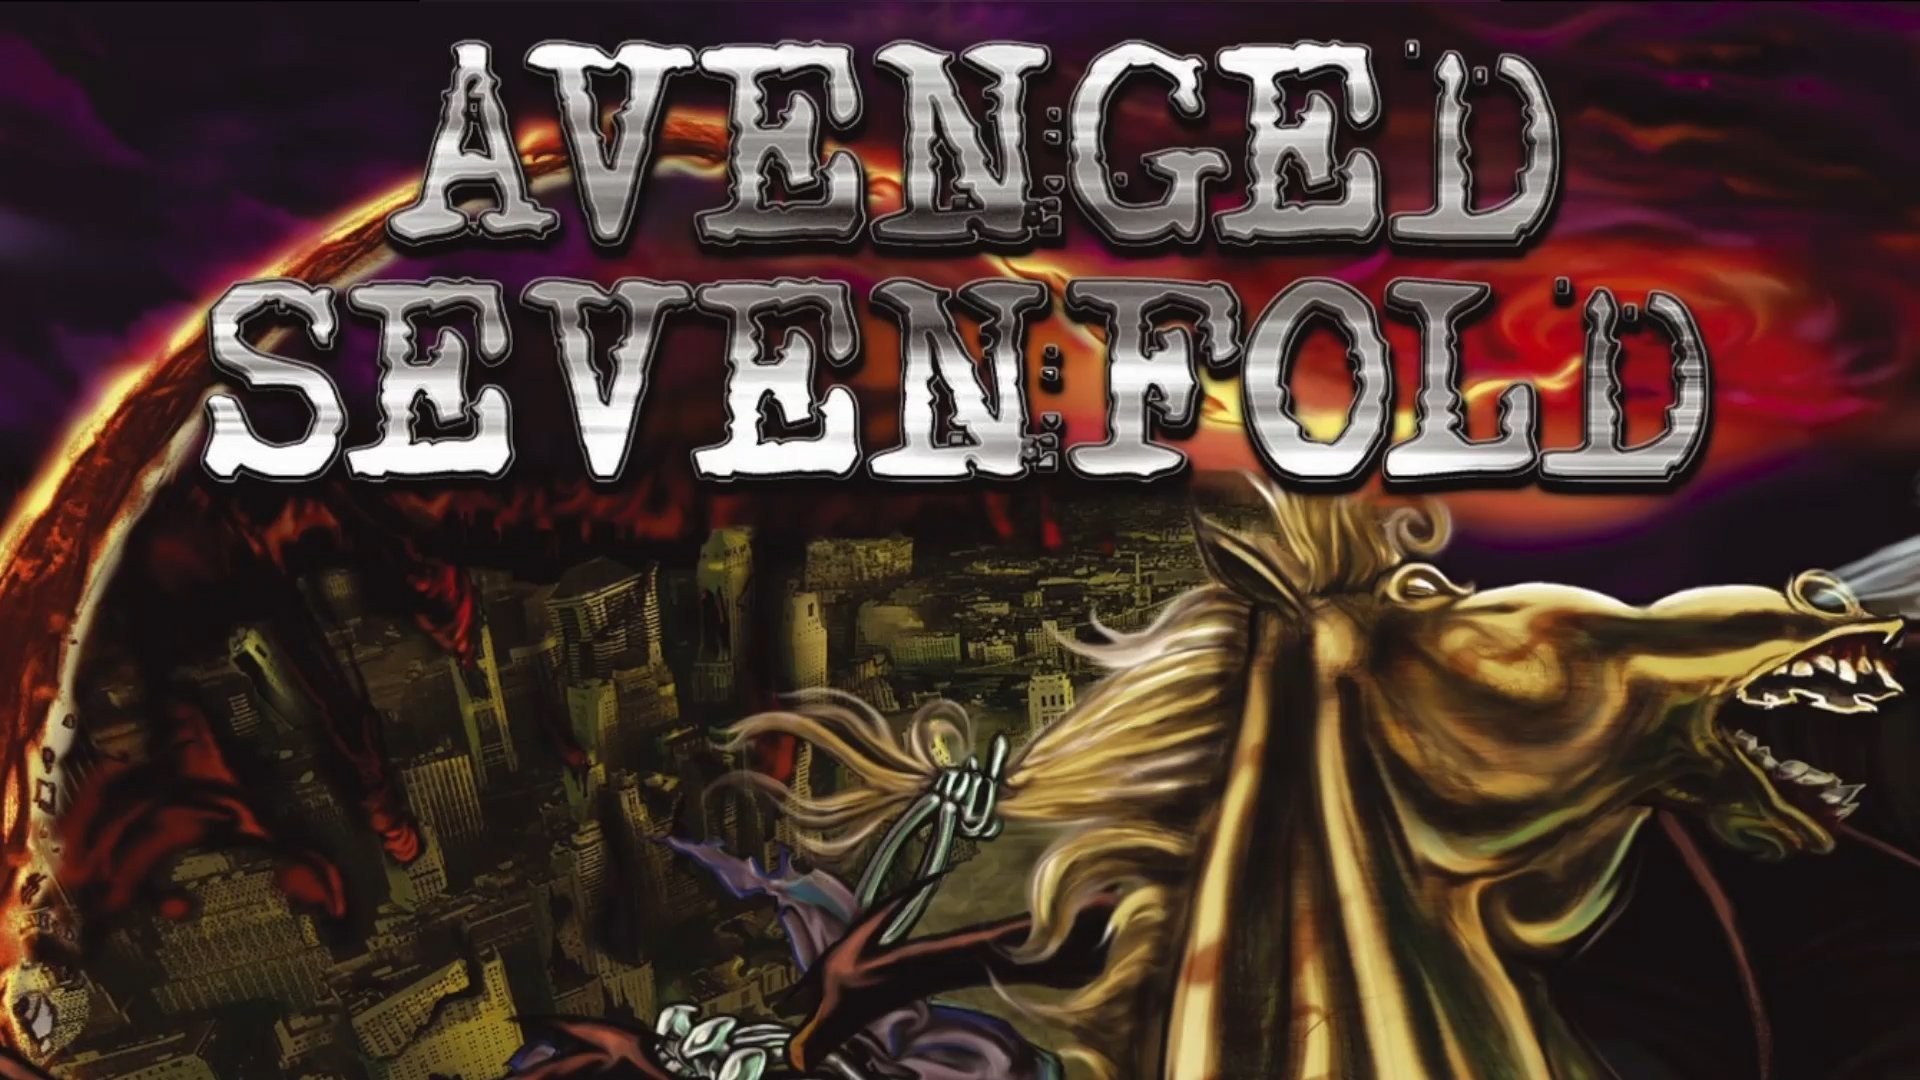 Avenged Sevenfold Live Wallpaper Wp2002642 - Pc Game , HD Wallpaper & Backgrounds